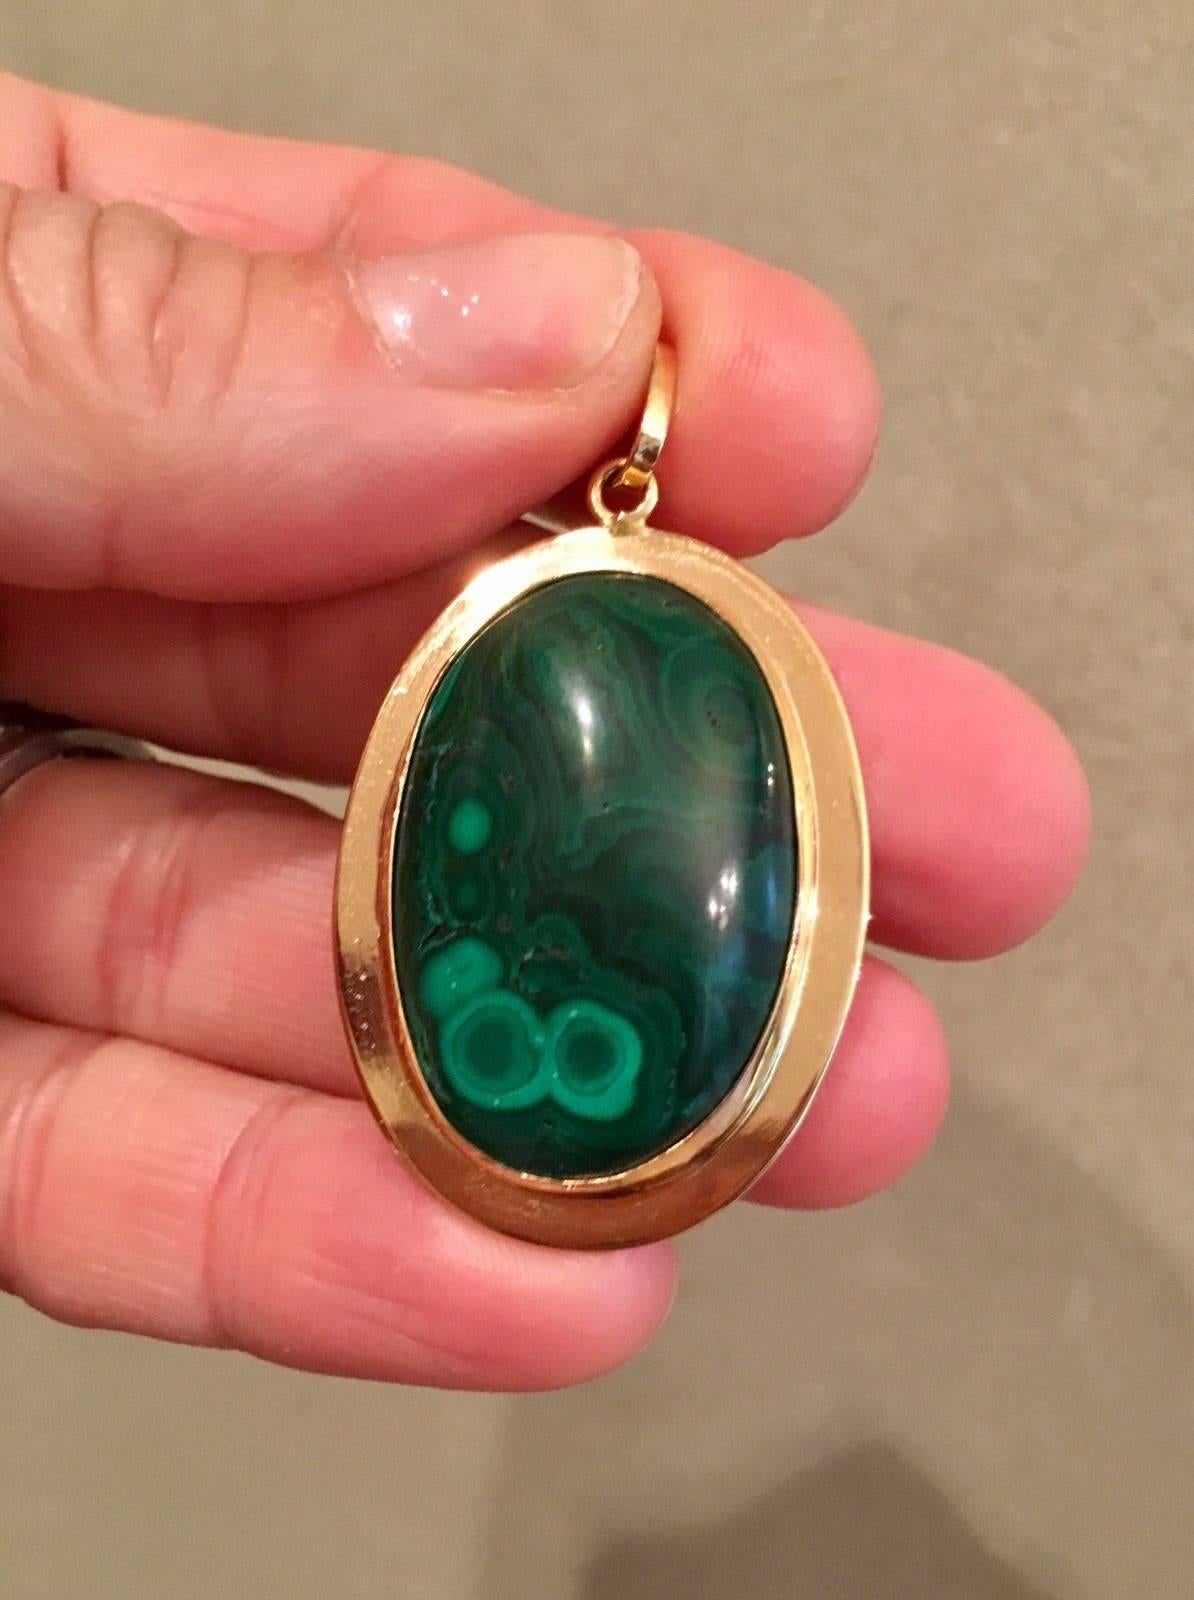 Stunning Vintage Estate Russian 20K Yellow Gold Malachite Pendant for Necklace.  Chic pendant to wear on a gold chain for color against whites, pinks, purples! Pendant measures approximately 2" tall x 1 1/4" wide and weighs 13 grams.